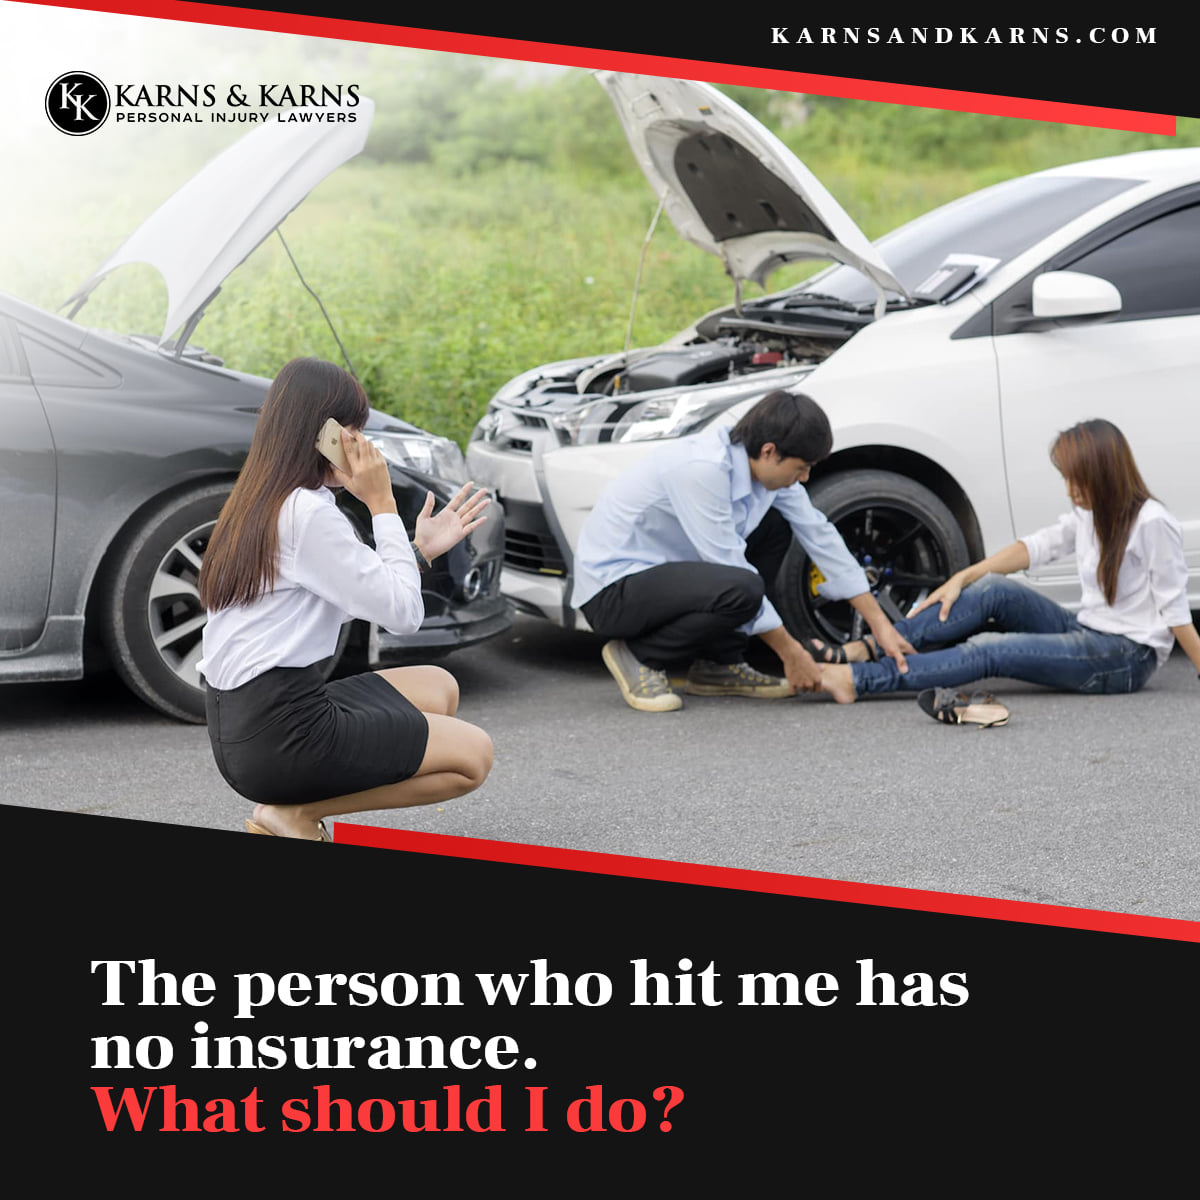 Karns & Karns Injury and Accident Attorneys | 4900 California Ave Bldg. B, 2nd Fl, Bakersfield, CA 93309 | Phone: (661) 384-6009